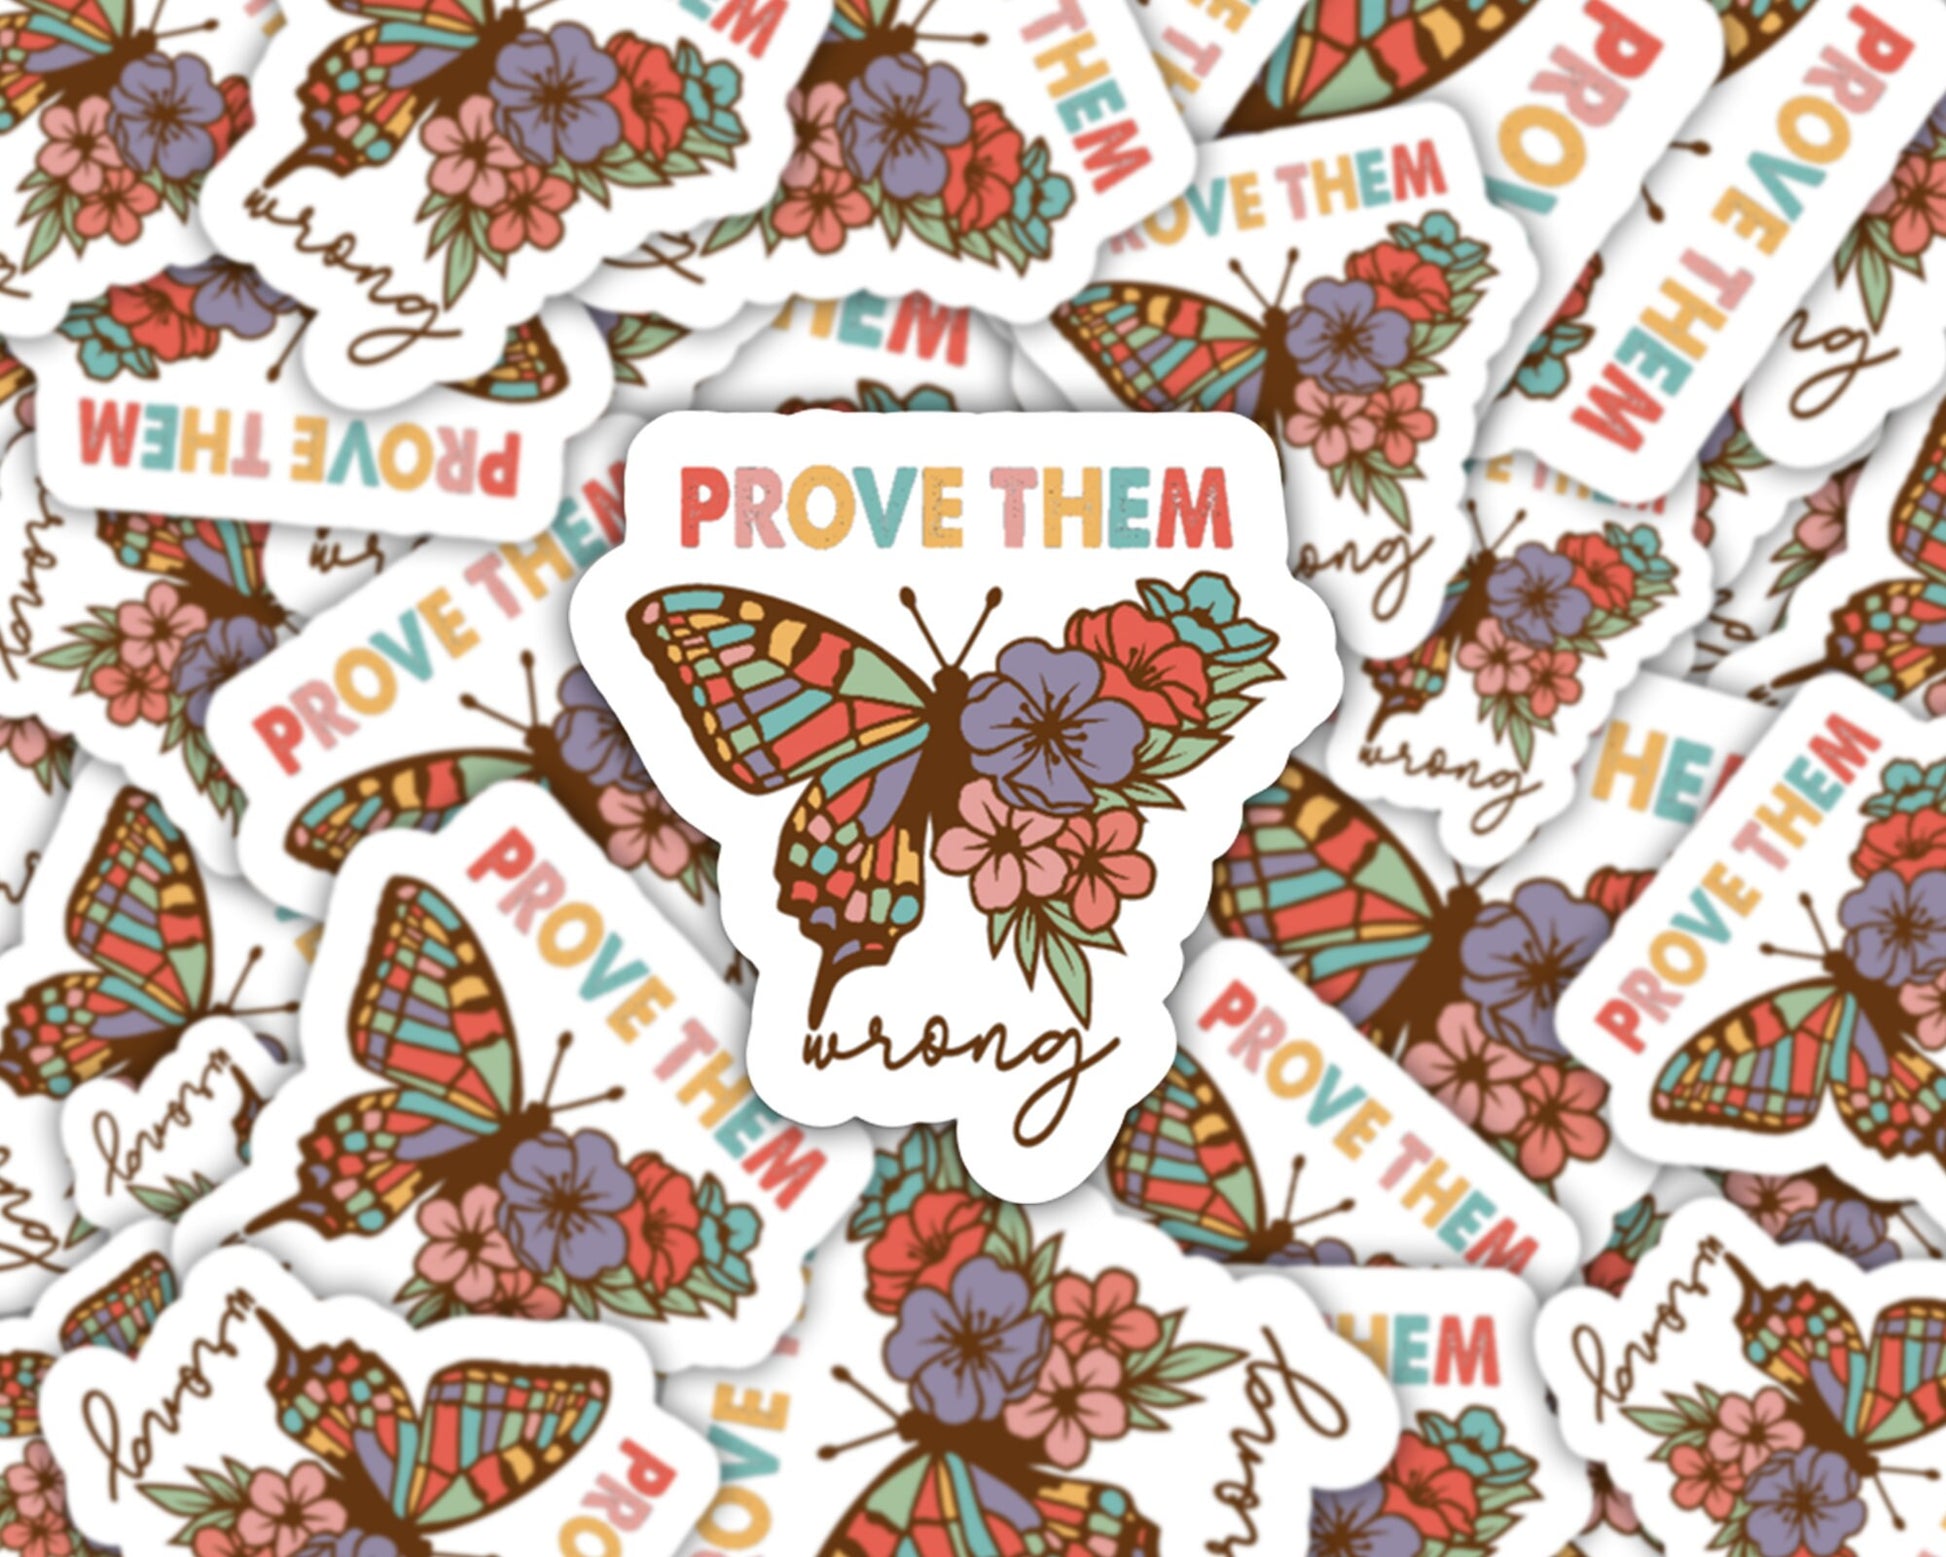 prove them wrong sticker, mental health stickers, positive affirmations, positivity sticker, butterfly sticker, sticker for daughter